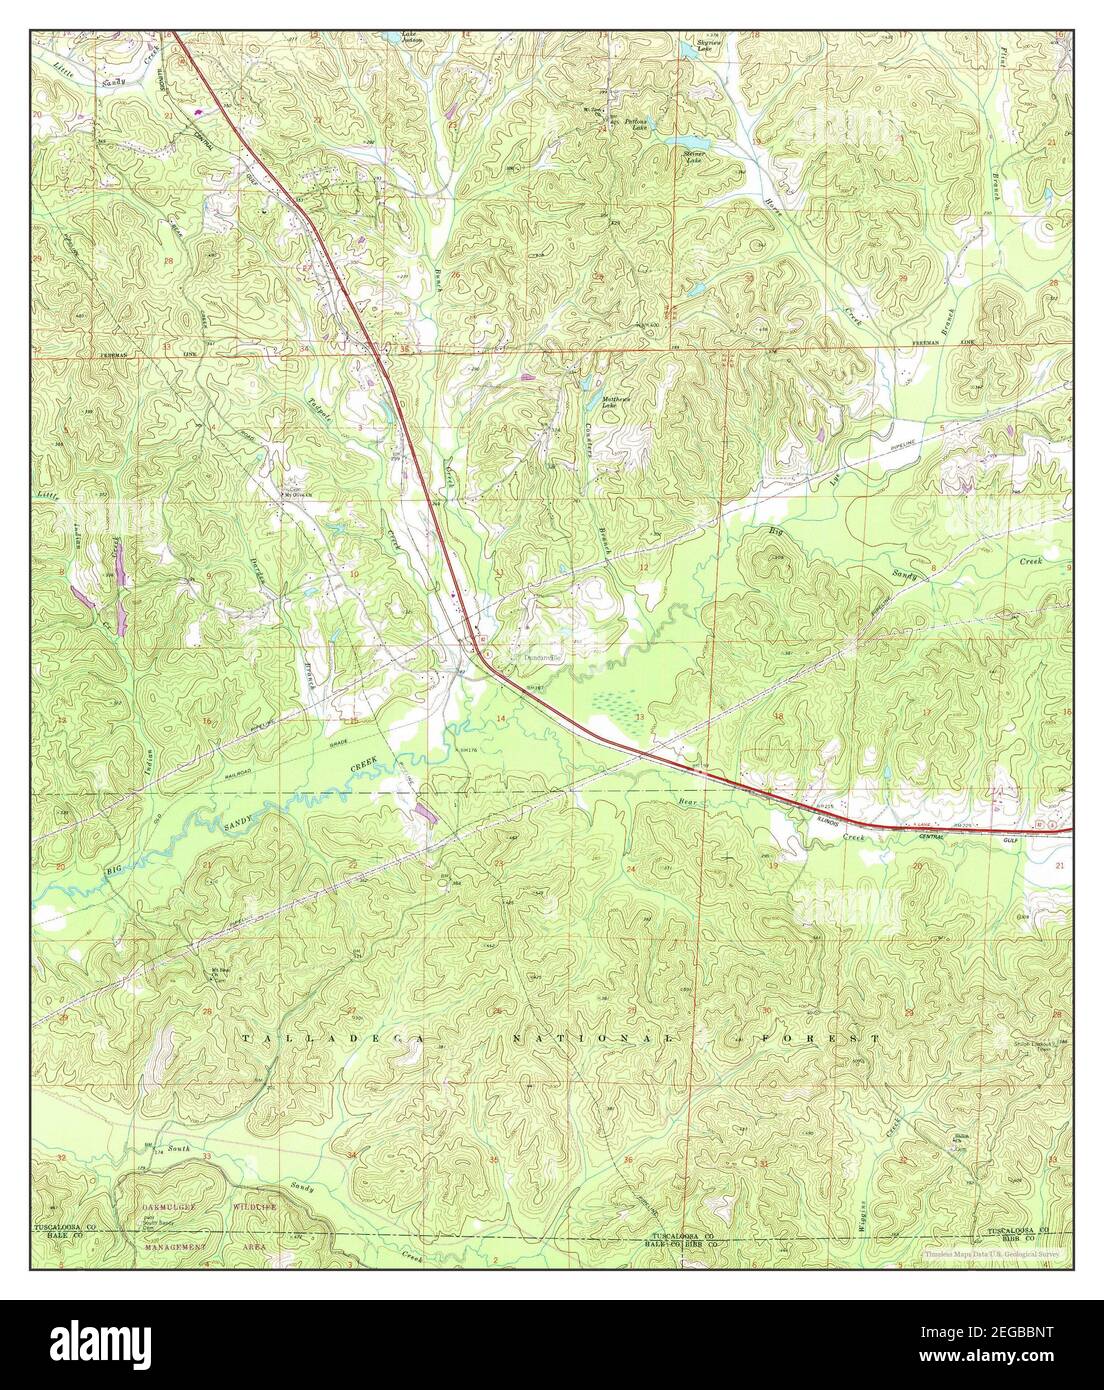 Duncanville, Alabama, map 1969, 1:24000, United States of America by Timeless Maps, data U.S. Geological Survey Stock Photo